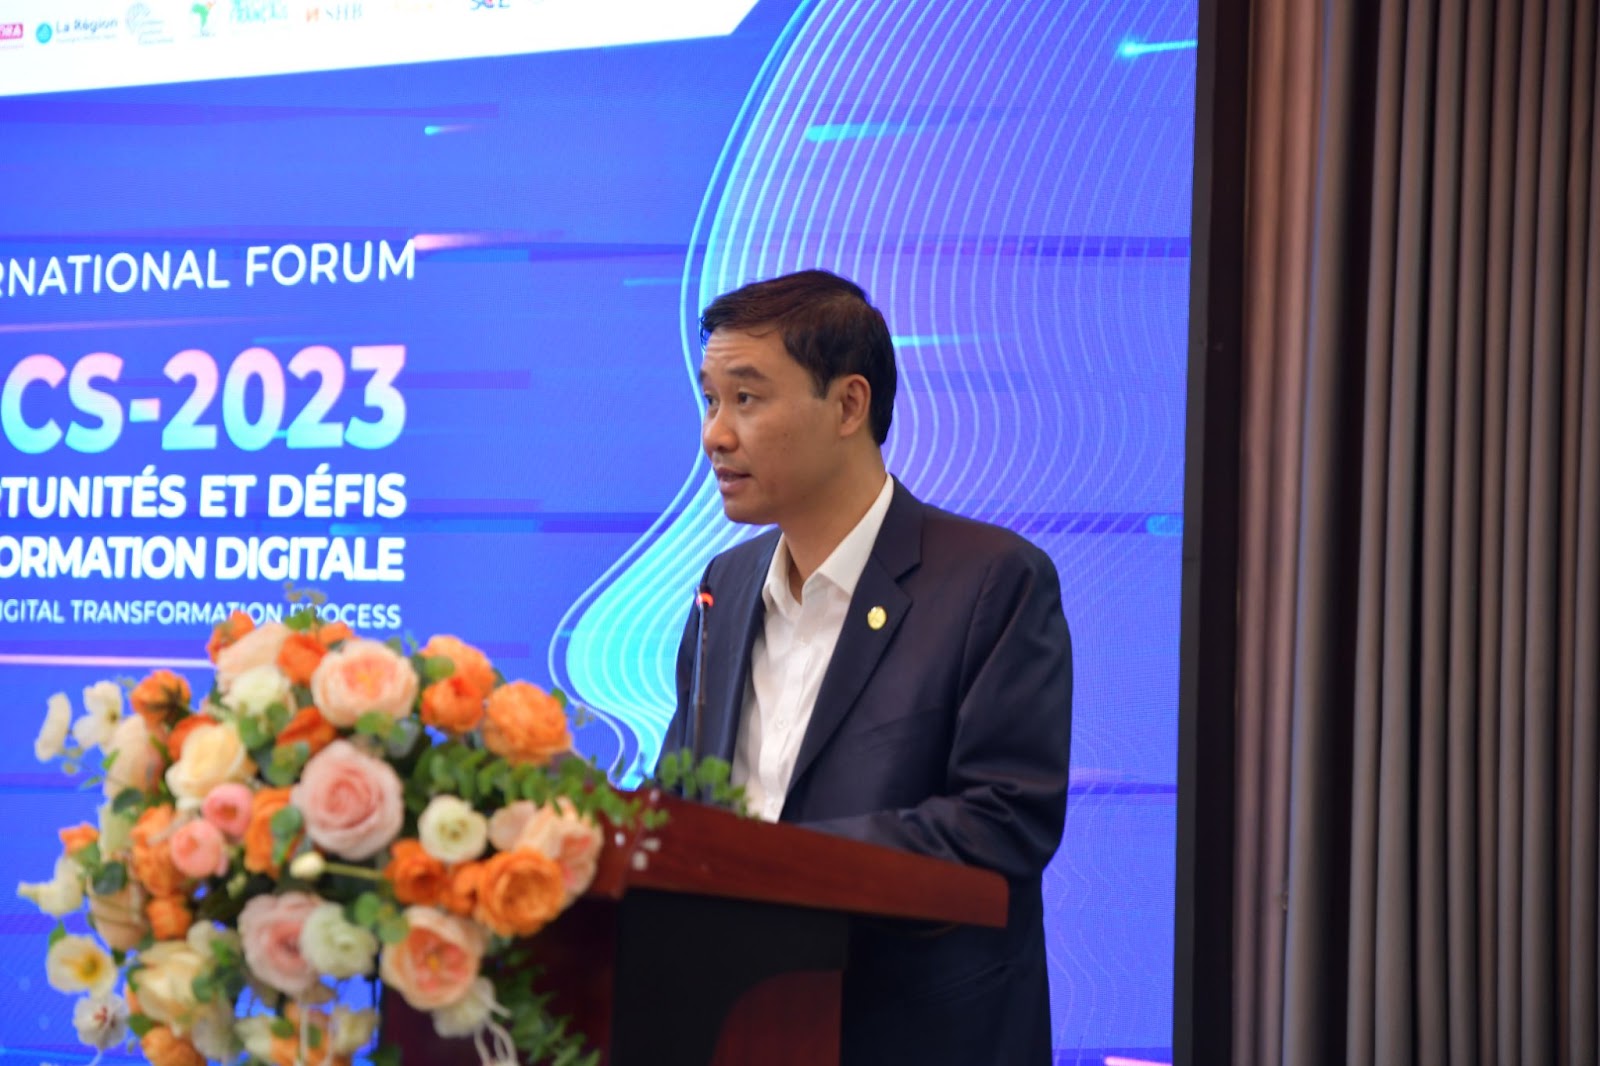 Mr. Nguyễn Hoàng Hải, the Permanent Vice President of Vietnam National University, Hanoi delivered a welcoming speech for the Franconomics-2023 Forum